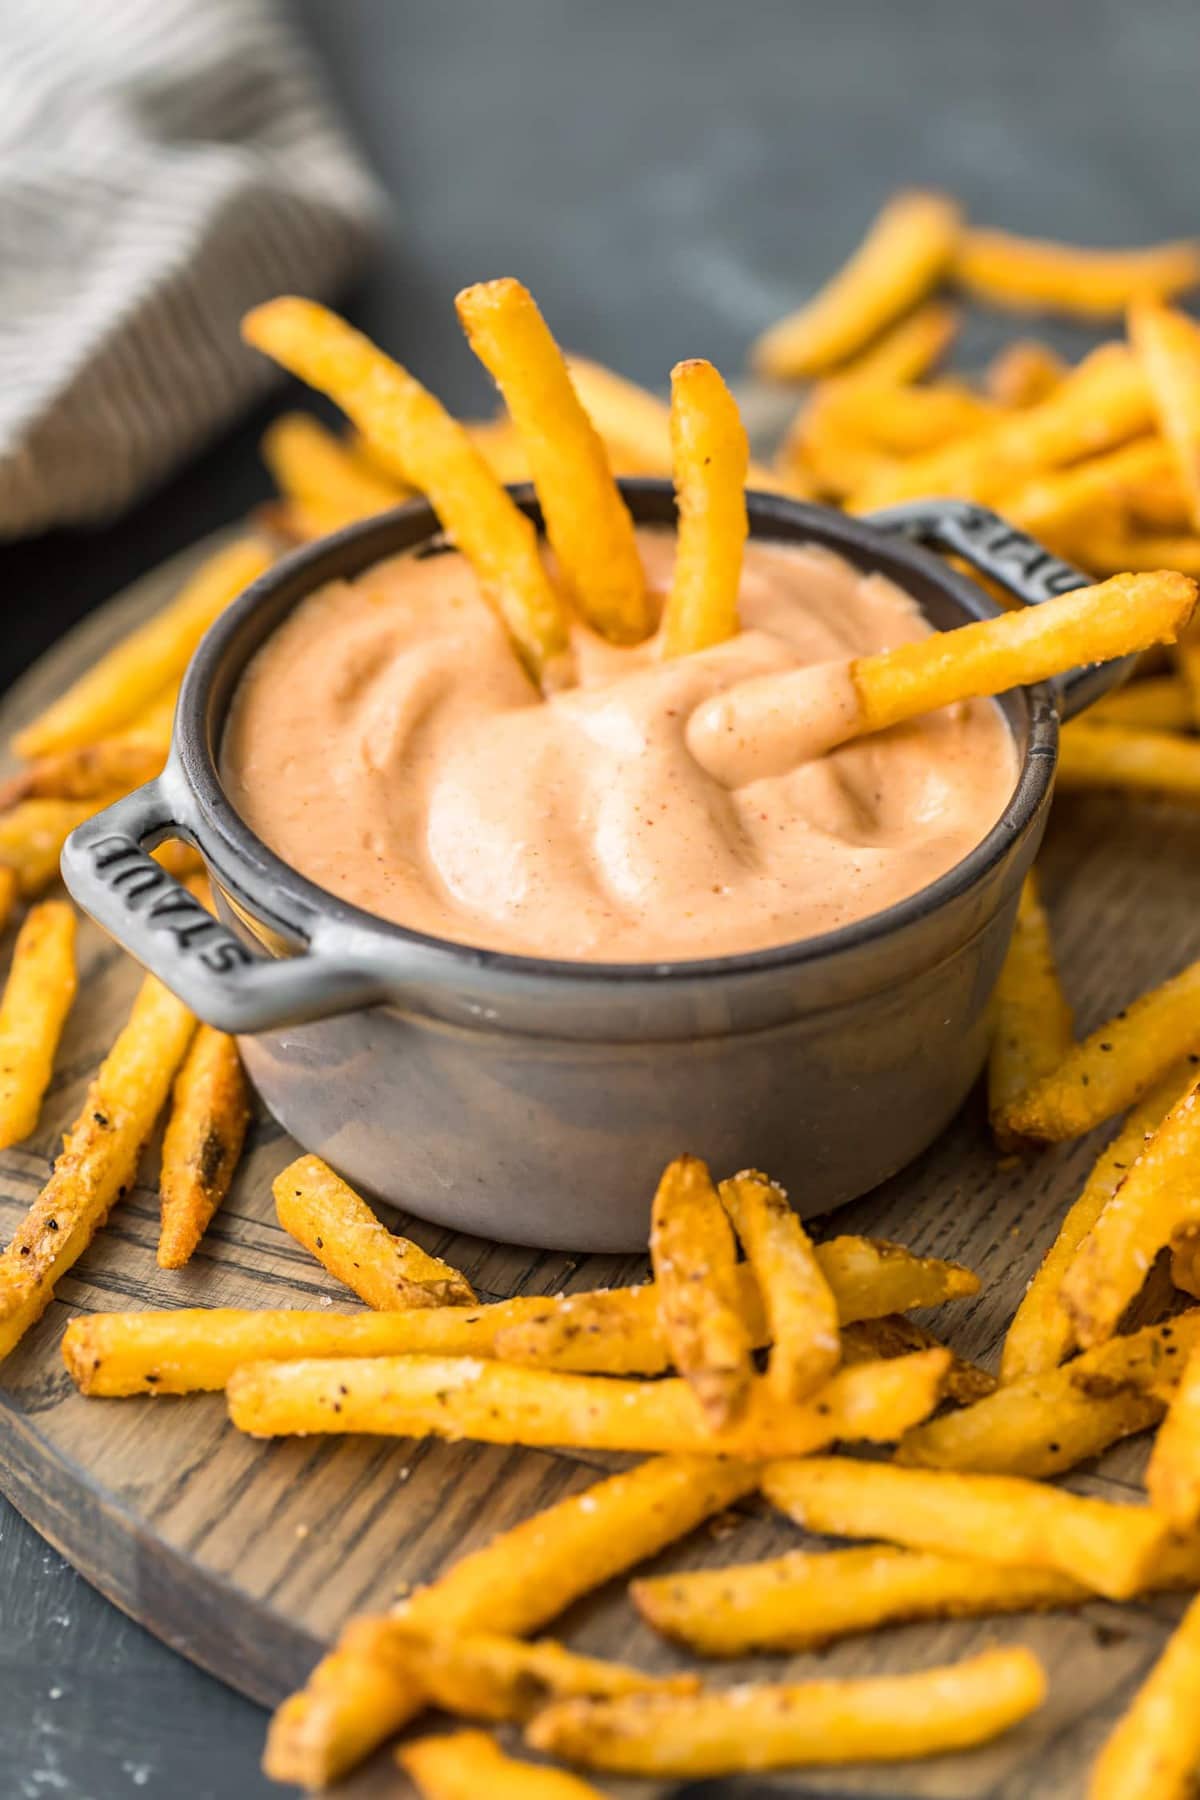 fries and dip on a wooden board